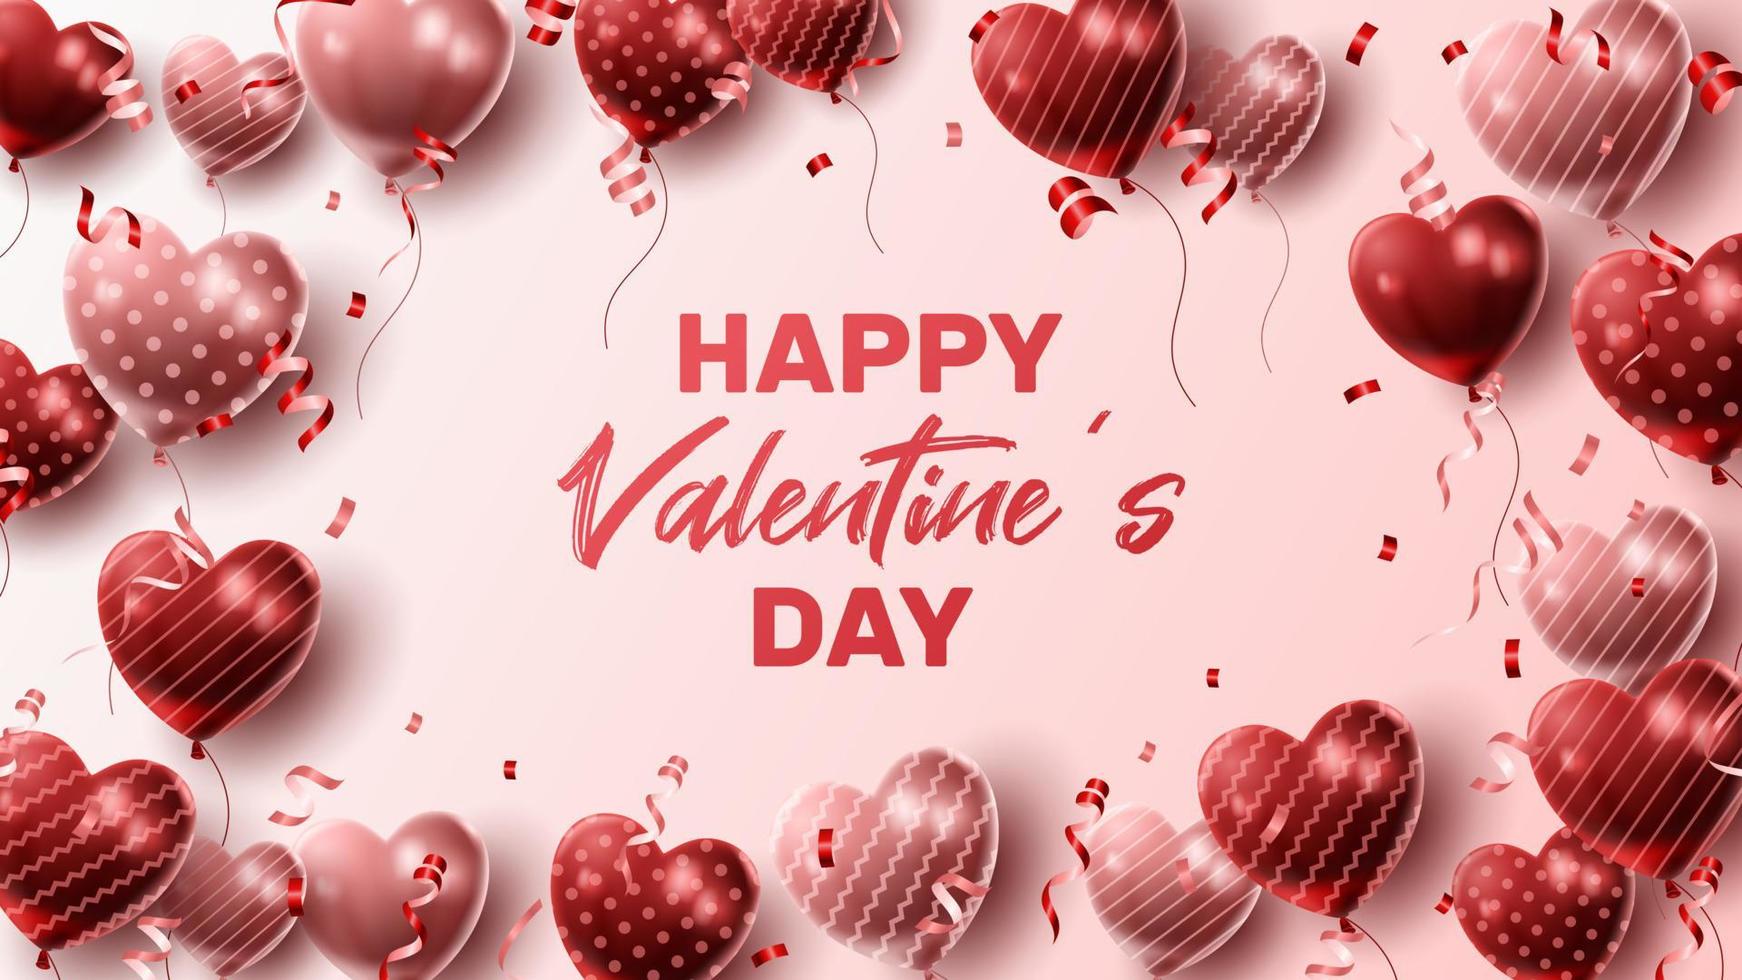 Happy Valentine's day background with heart balloon and present composition for banner, poster or greeting card. vector illustration